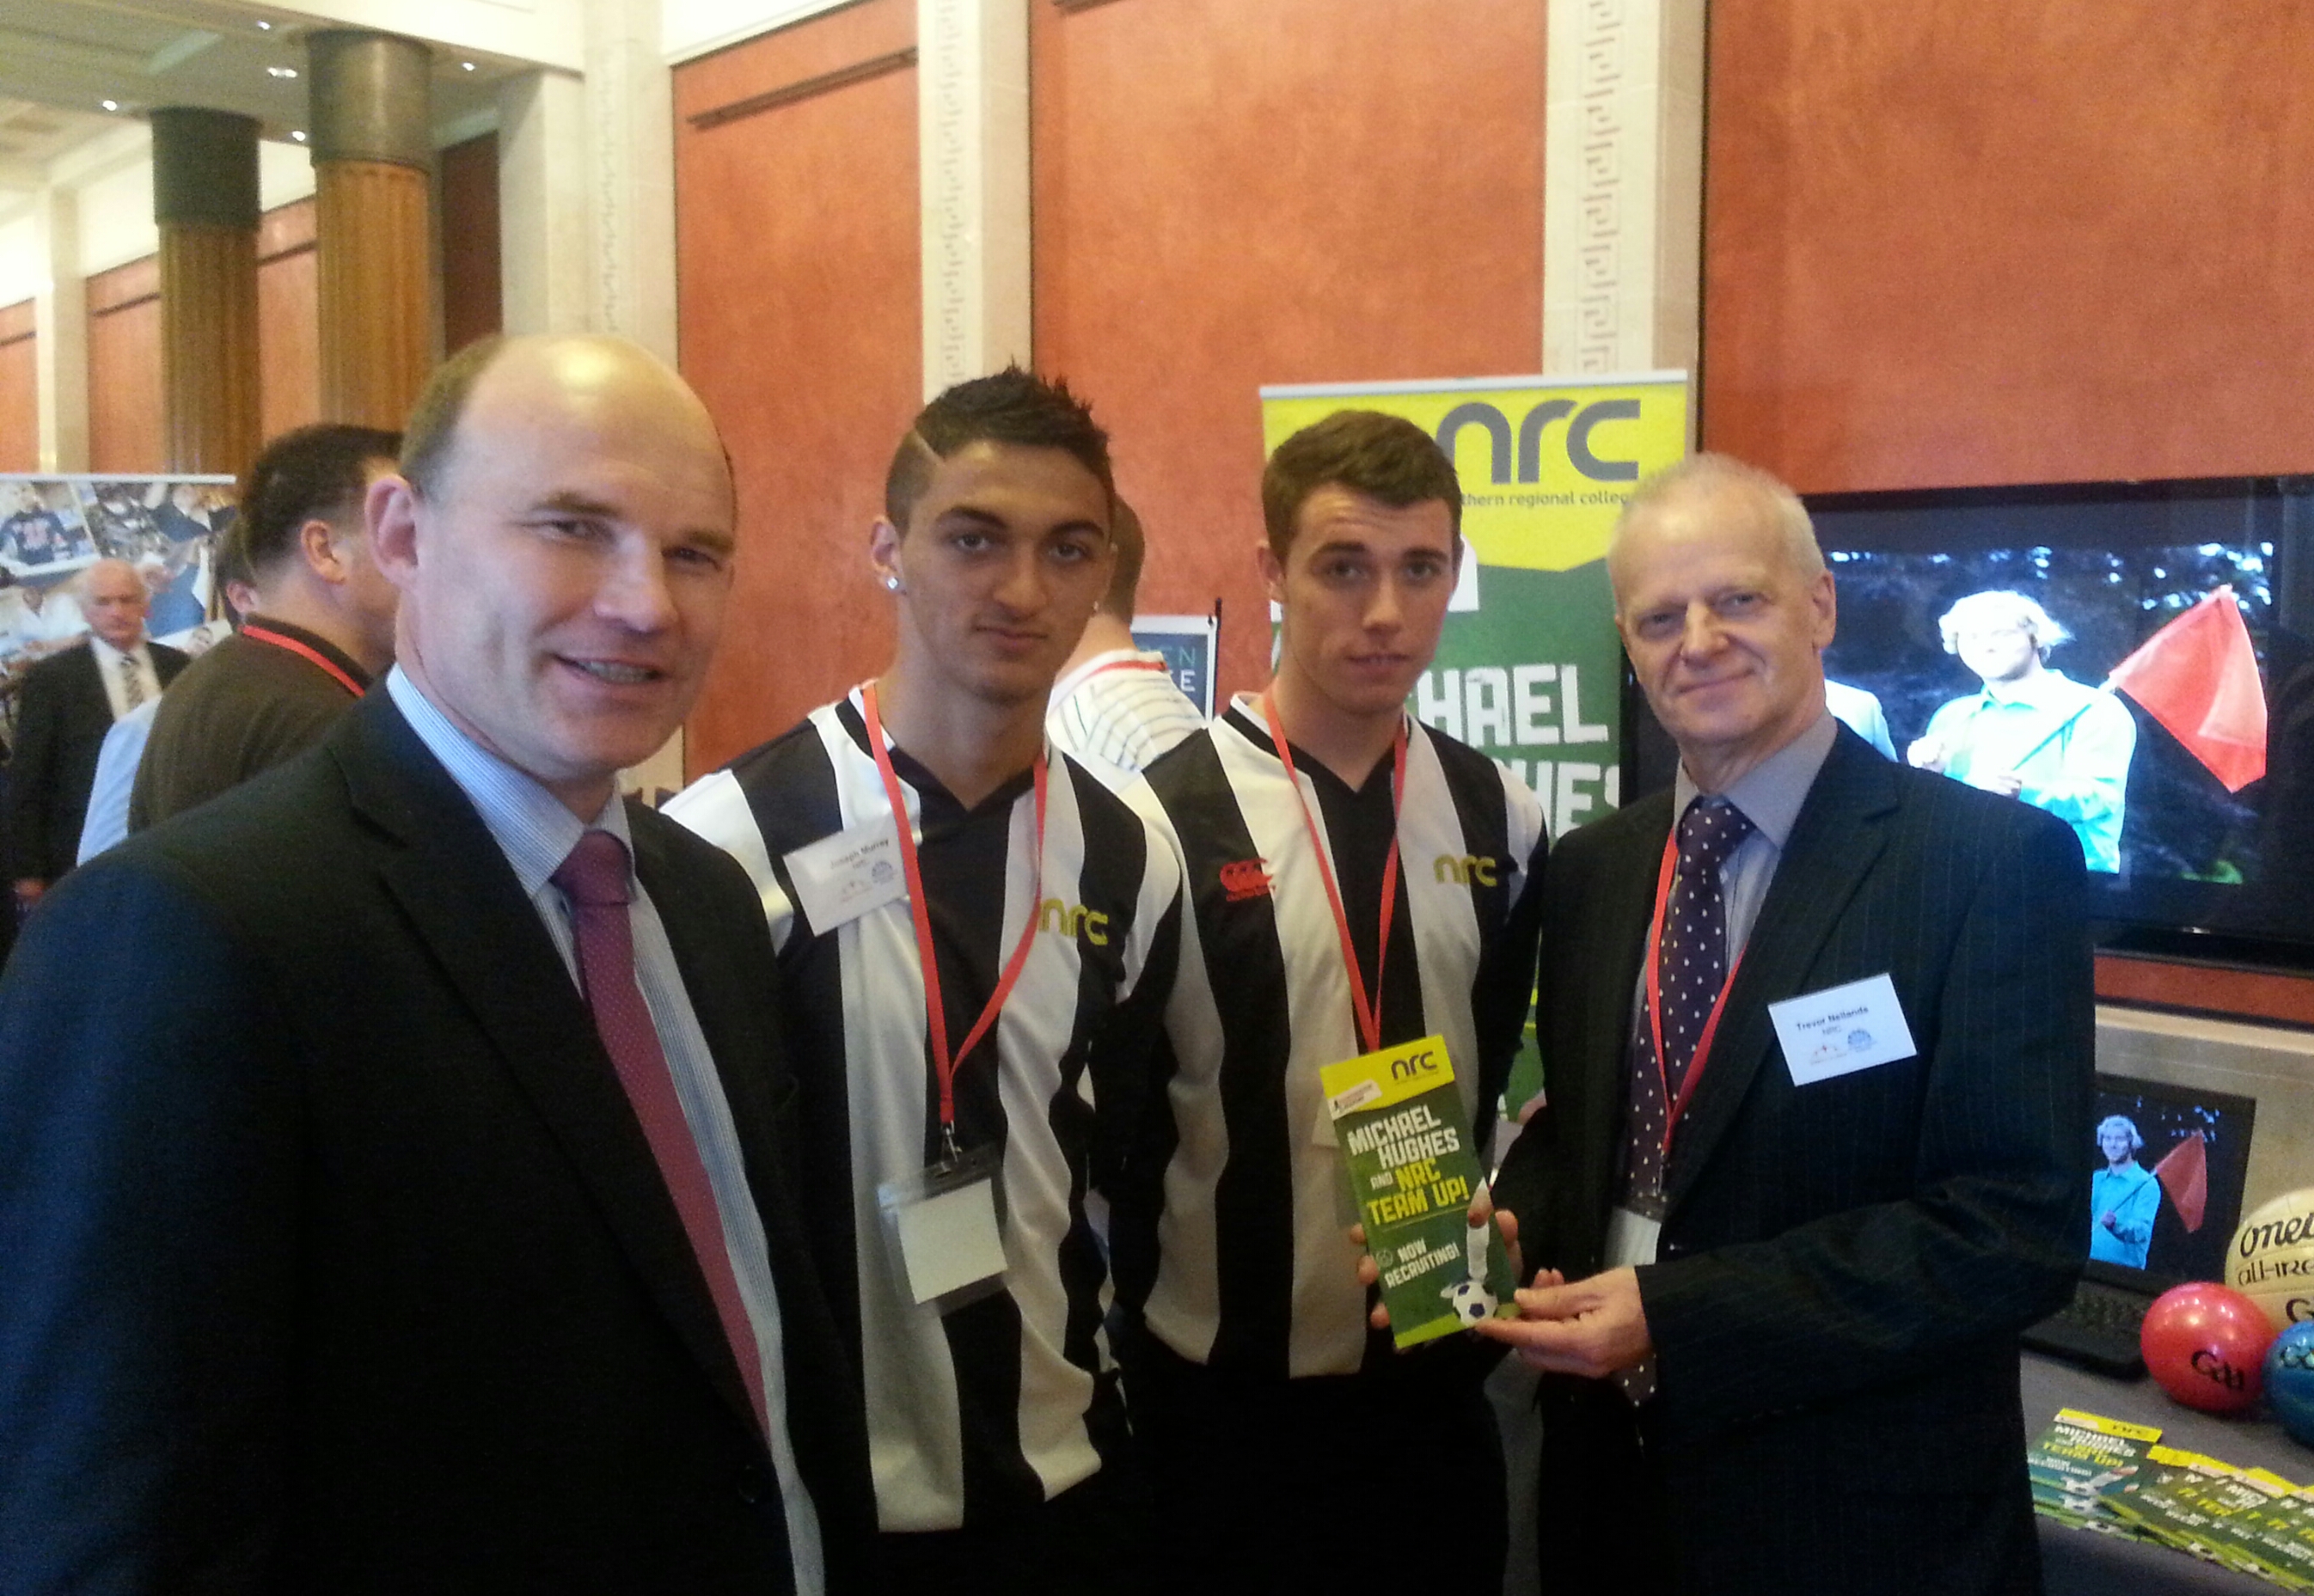 Stormont Showcase for NI Colleges